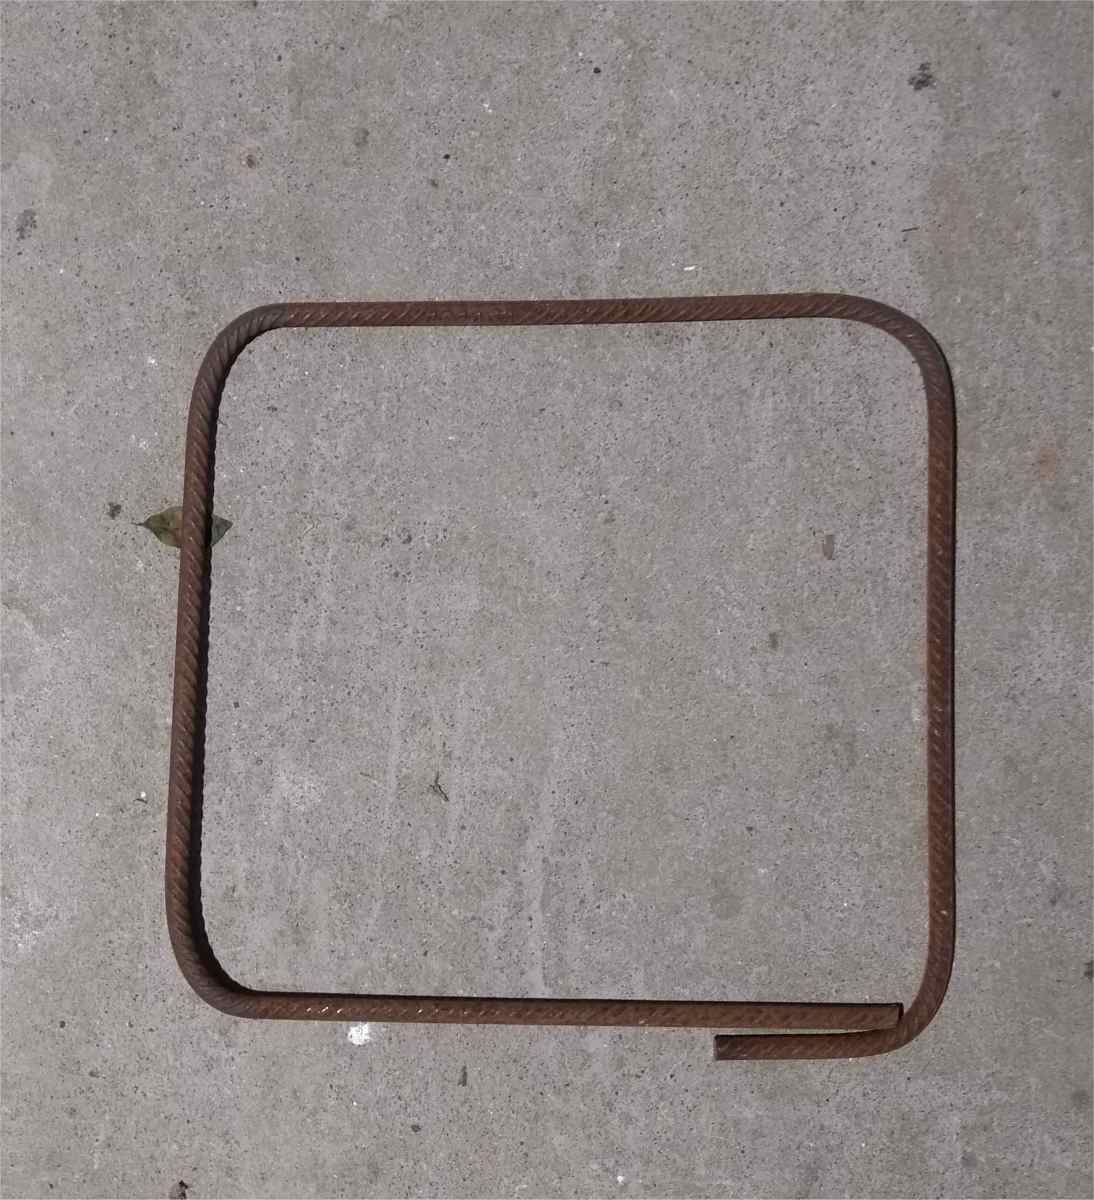 Square ring or "stirrup" made from rebar.